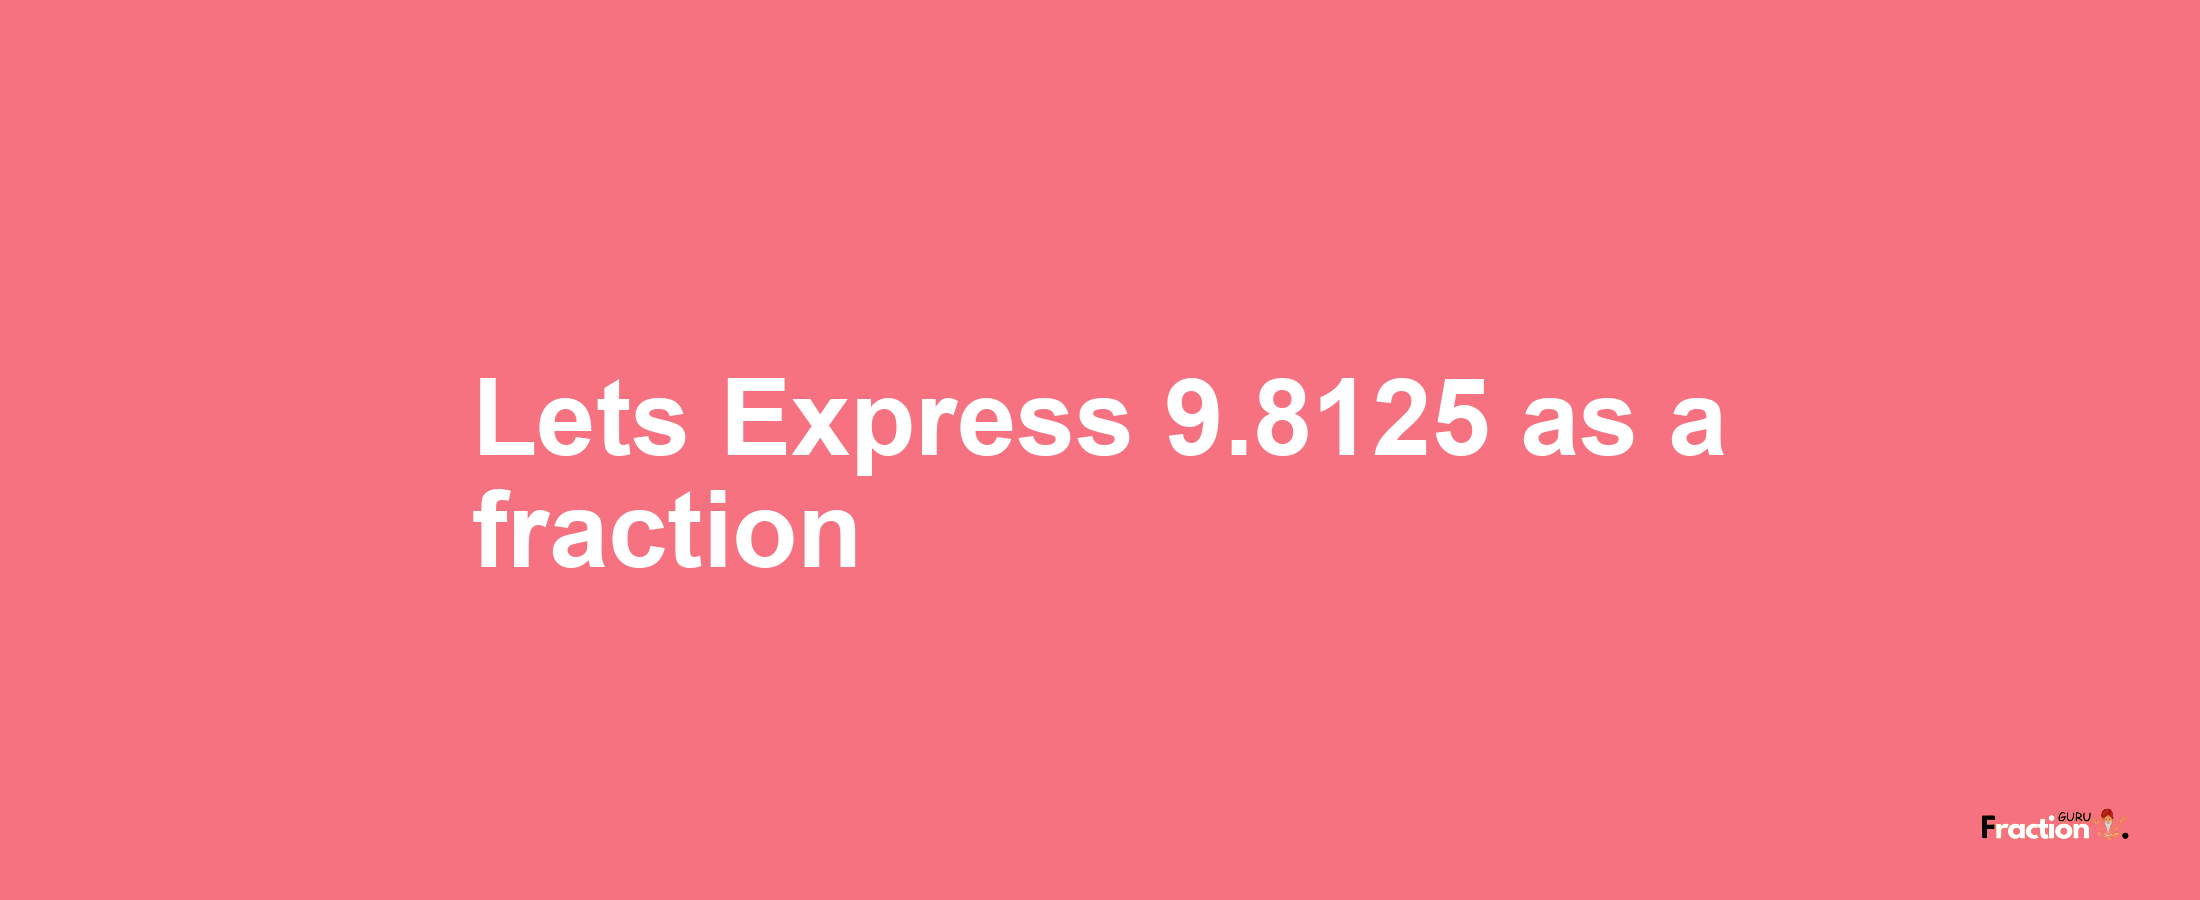 Lets Express 9.8125 as afraction